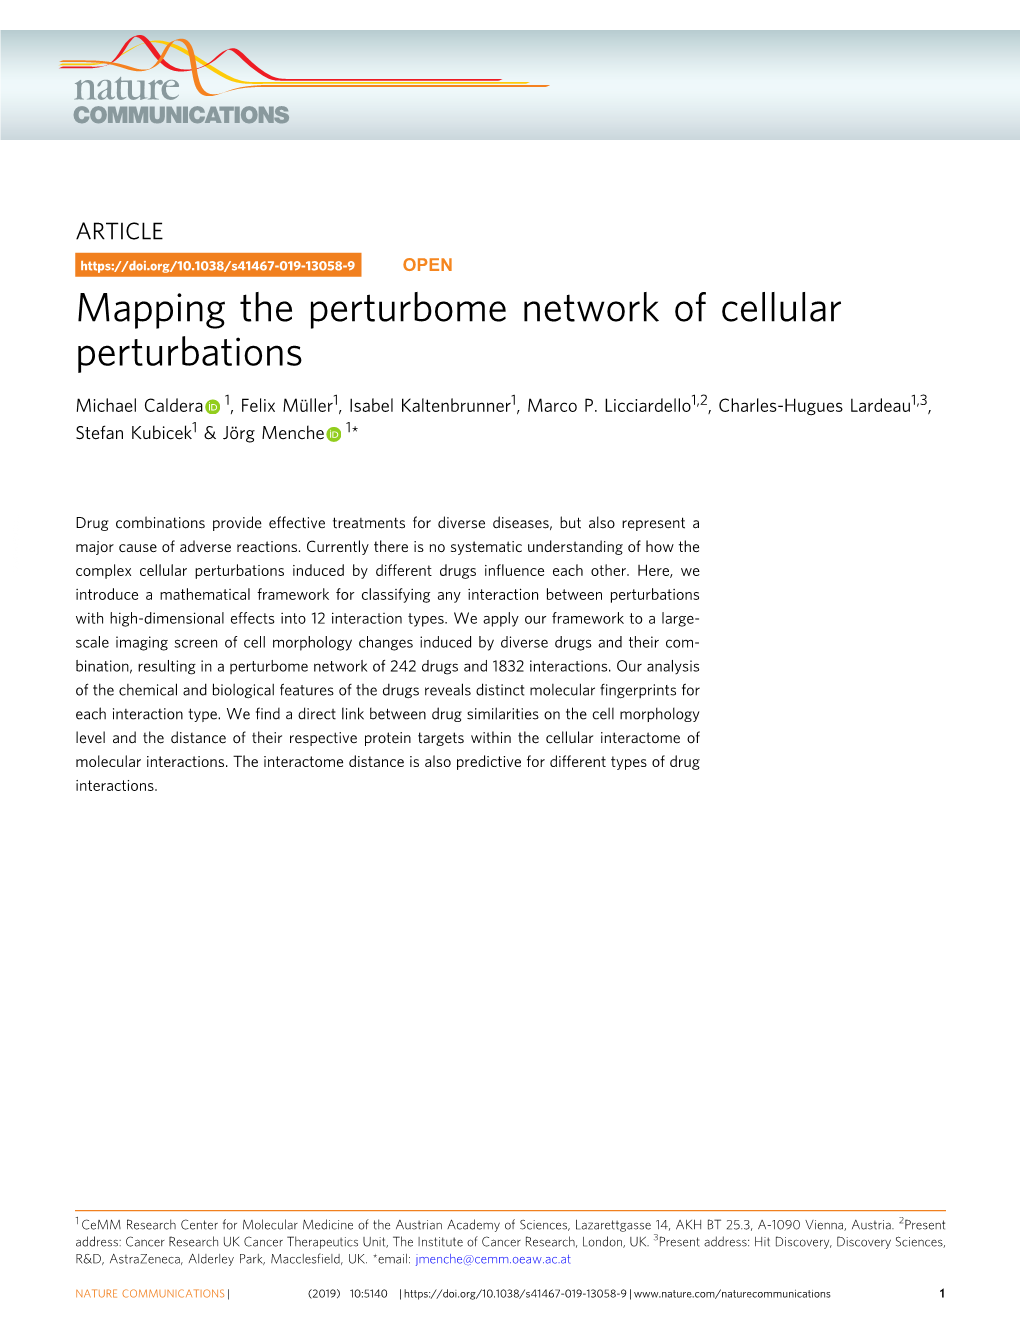 Mapping the Perturbome Network of Cellular Perturbations